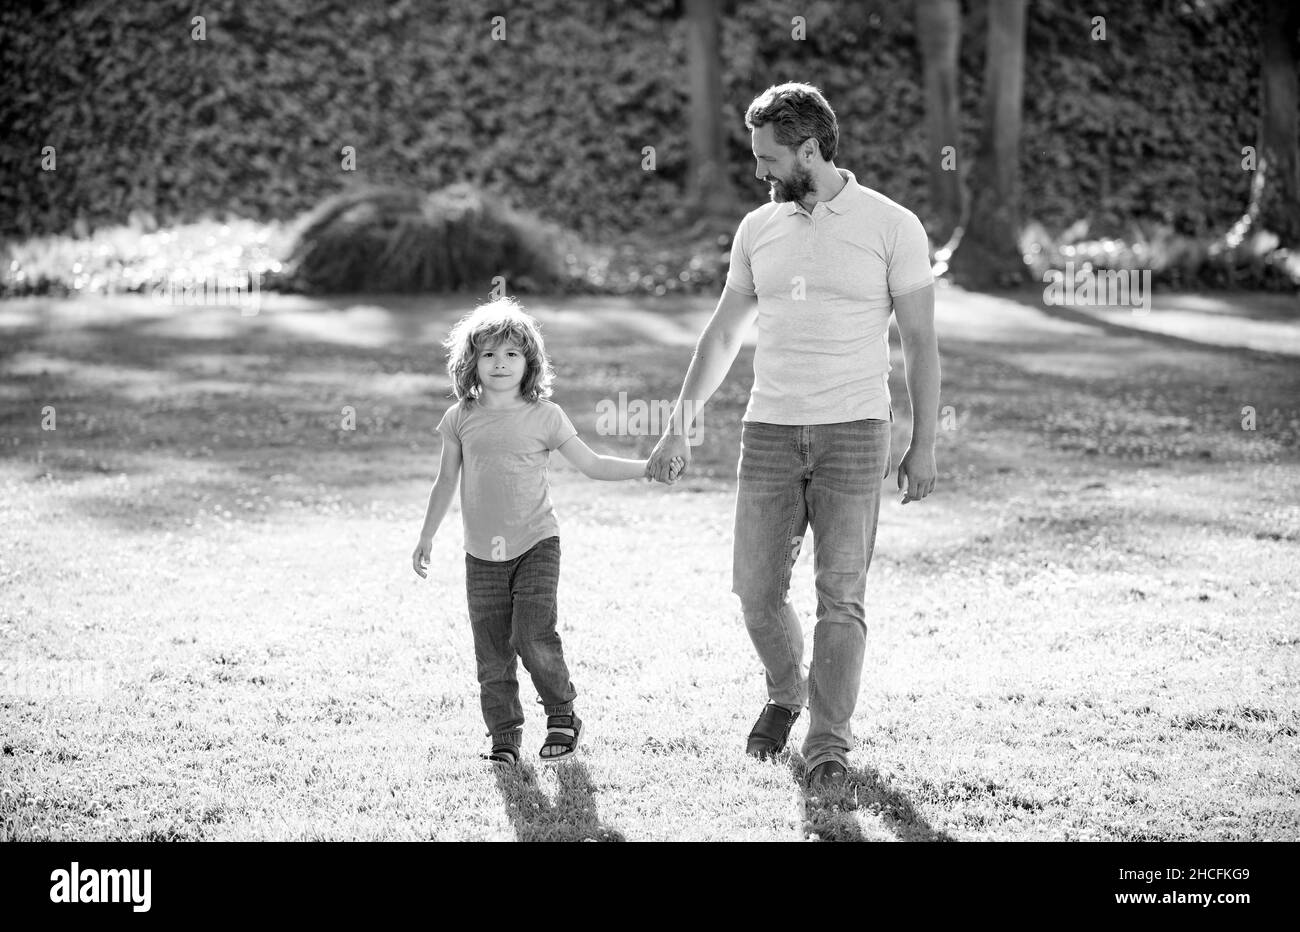 happy family value. childhood and parenthood. parent leads little child boy on grass. Stock Photo